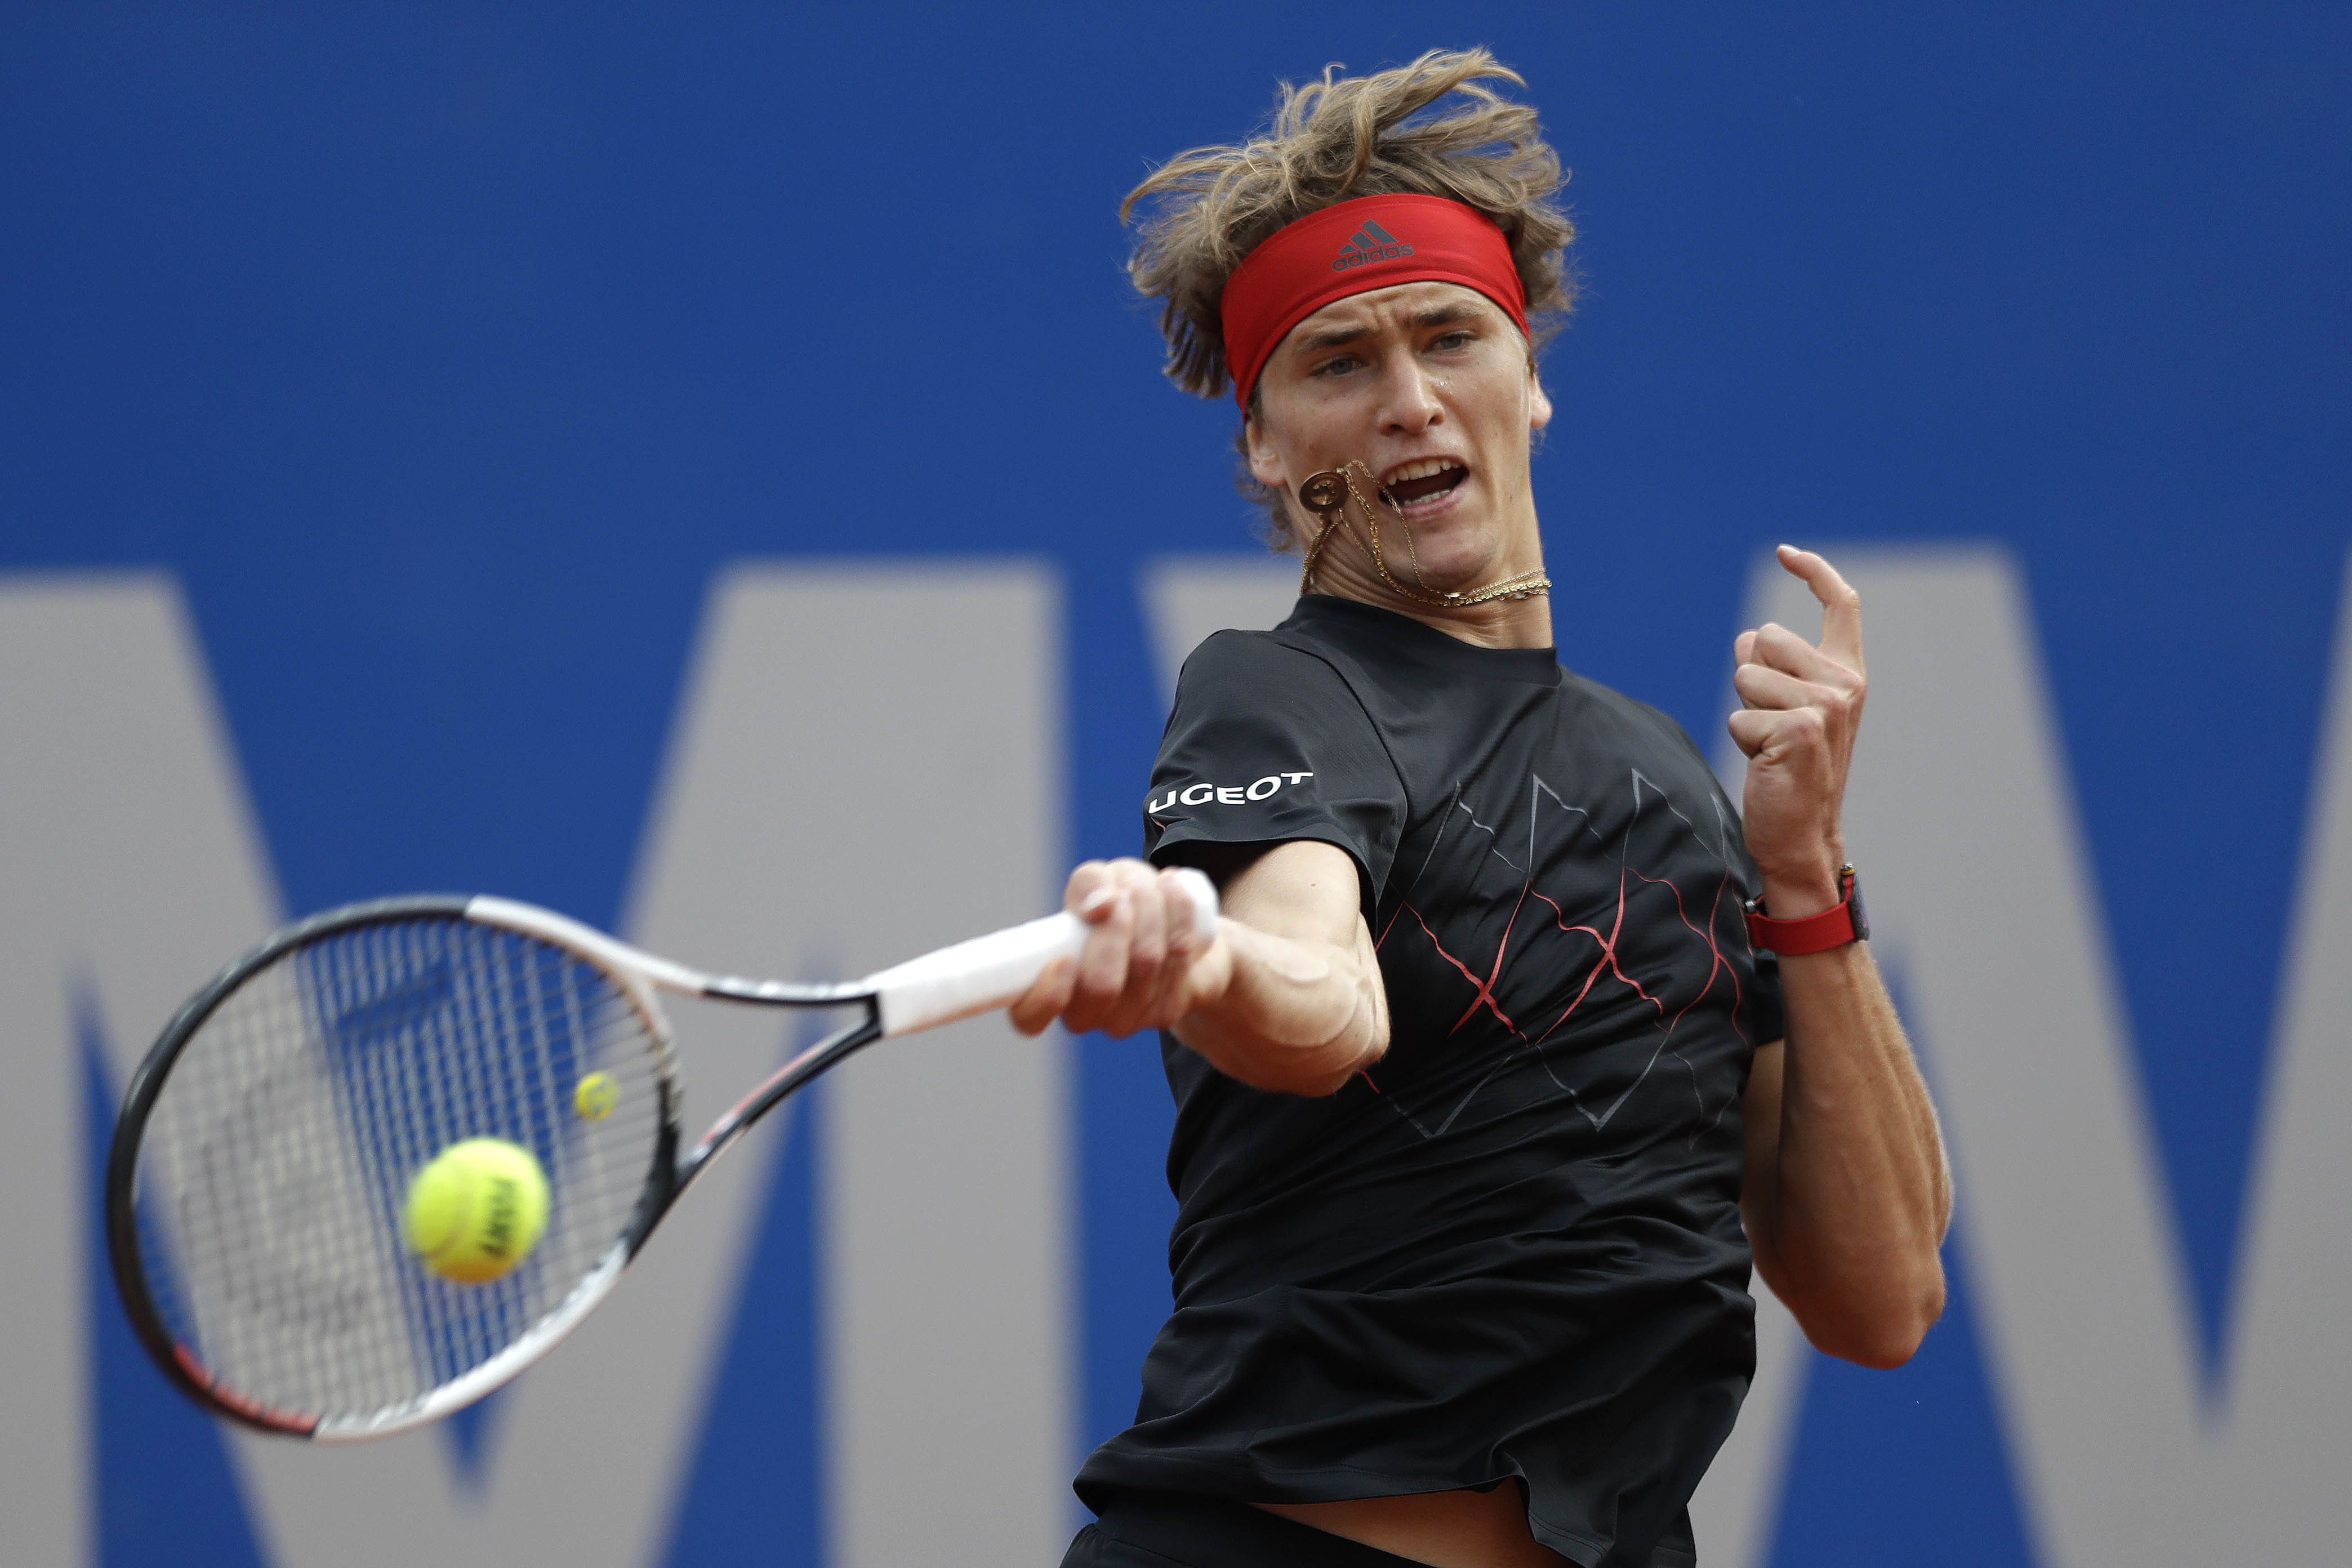 Zverev and Chung will meet in the Munich Open semifinals